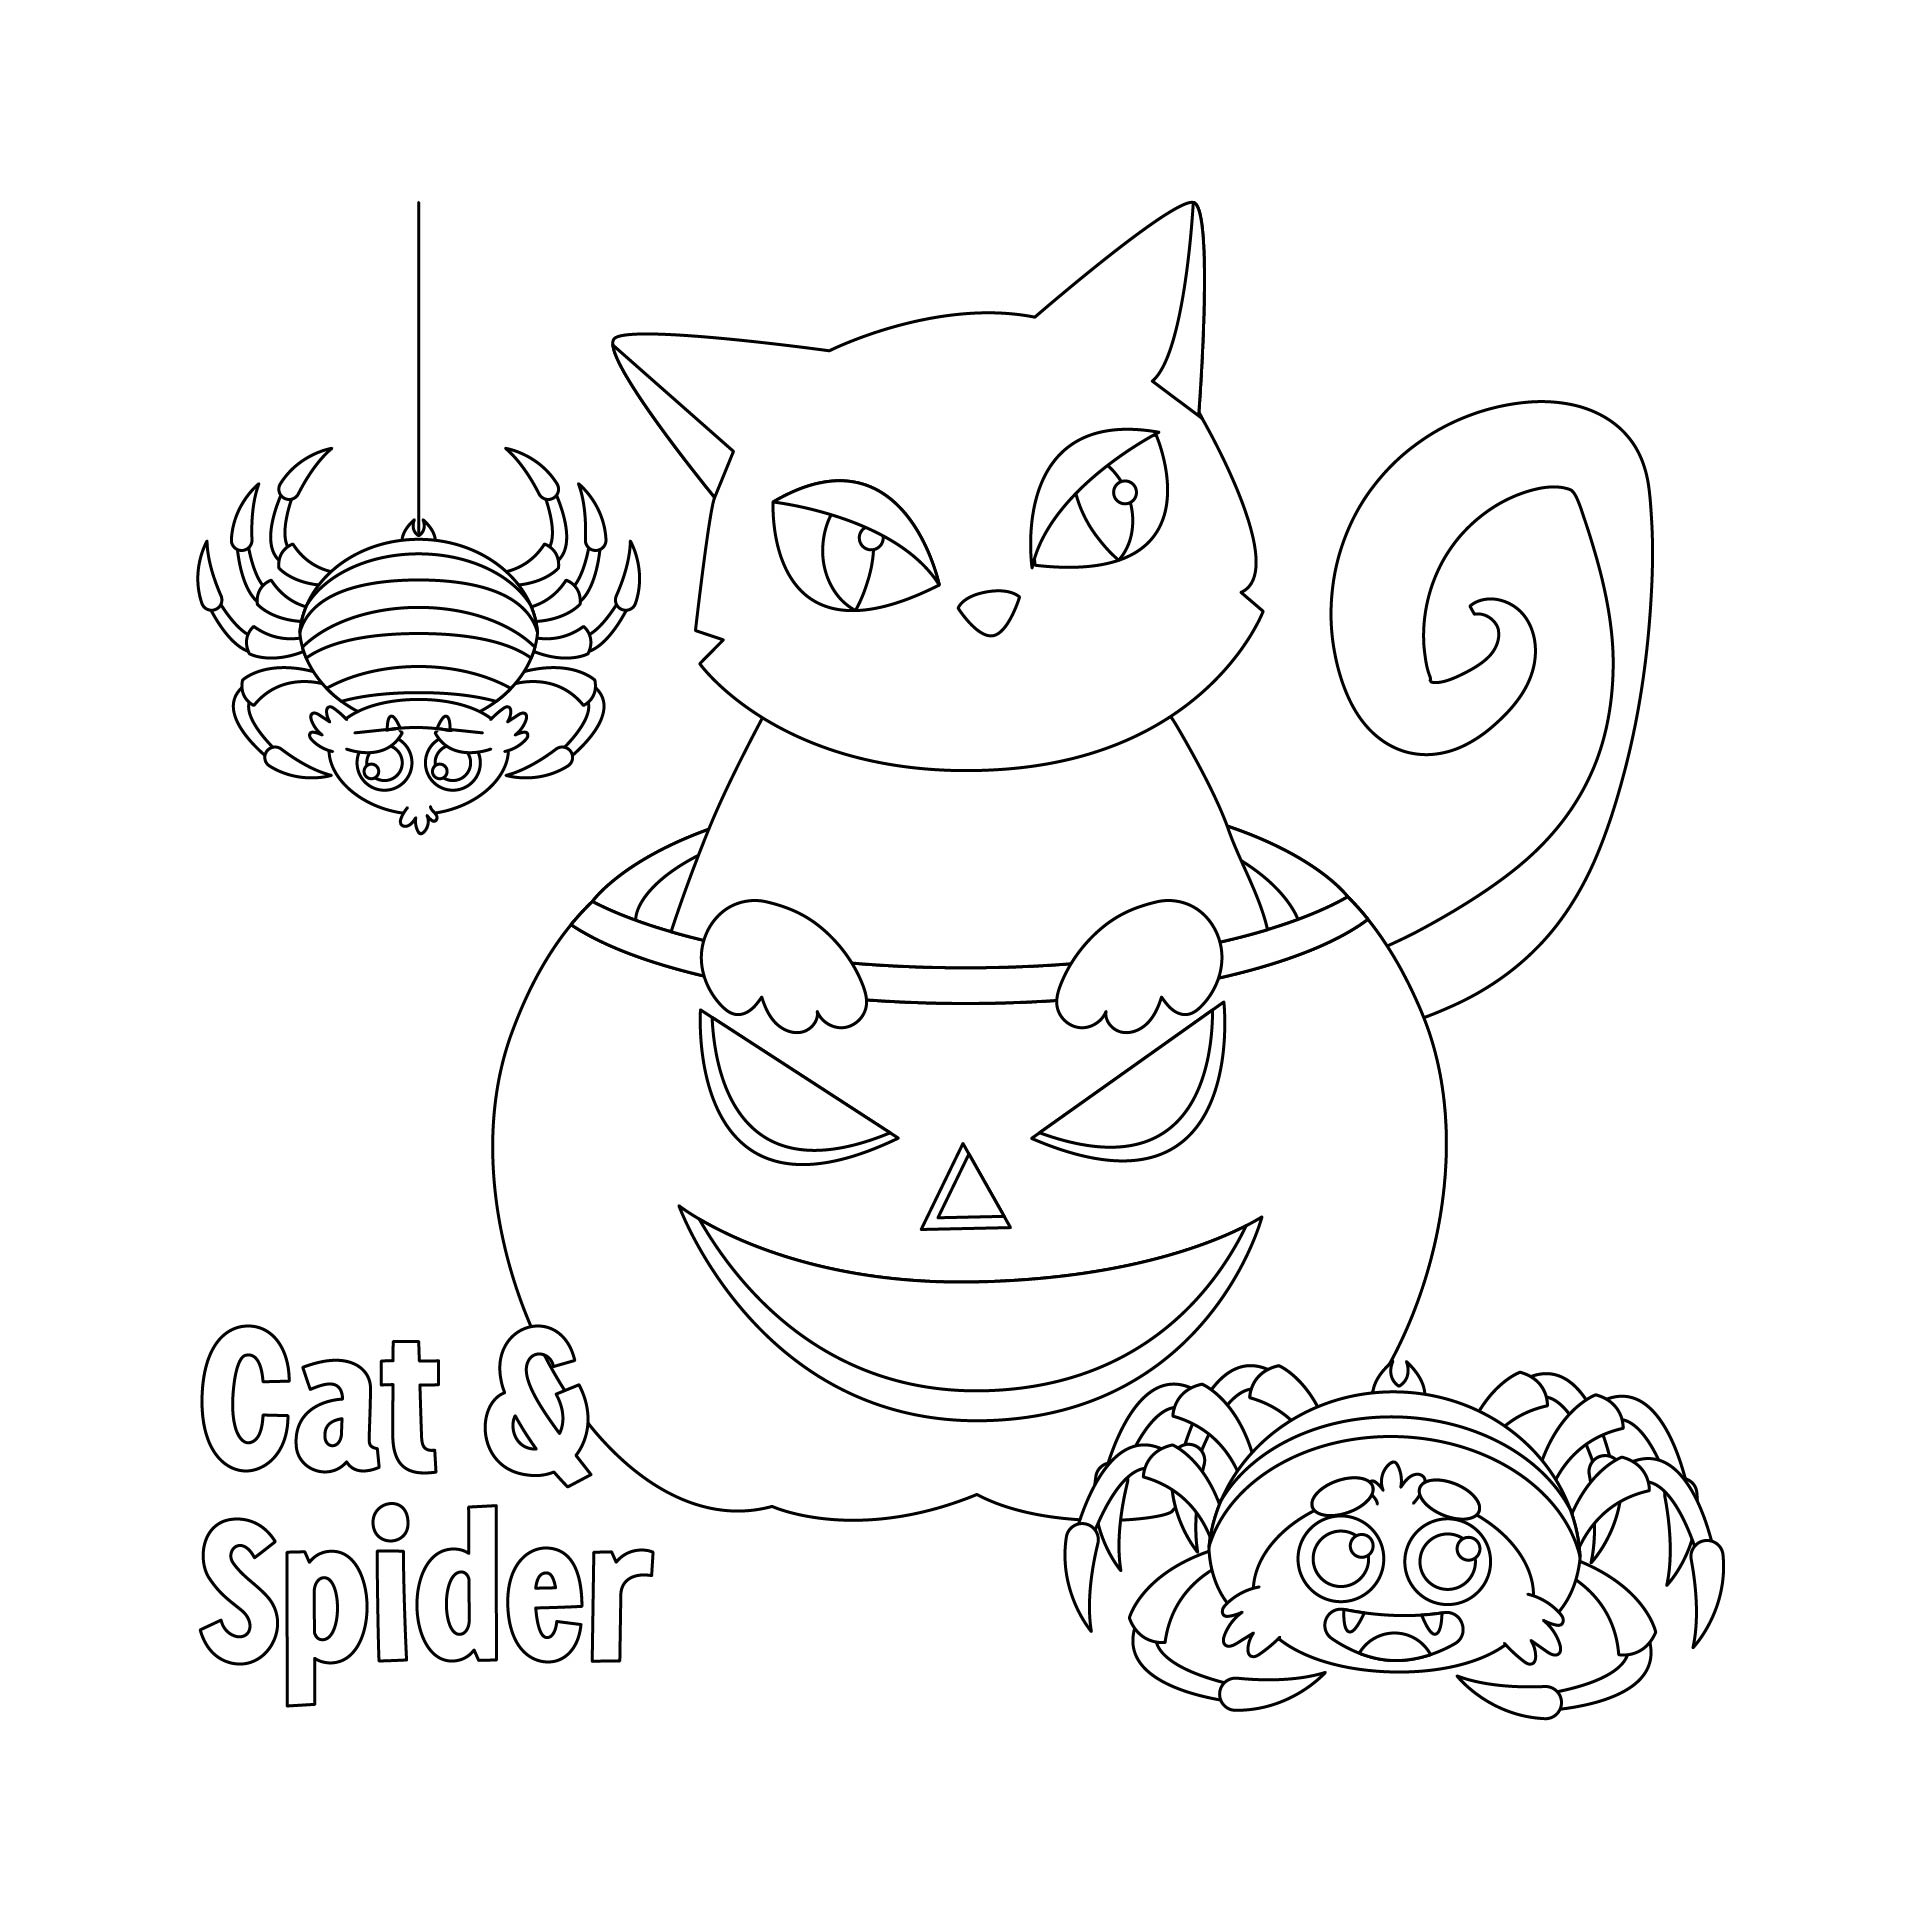 Cat And Spider Coloring Page Printable